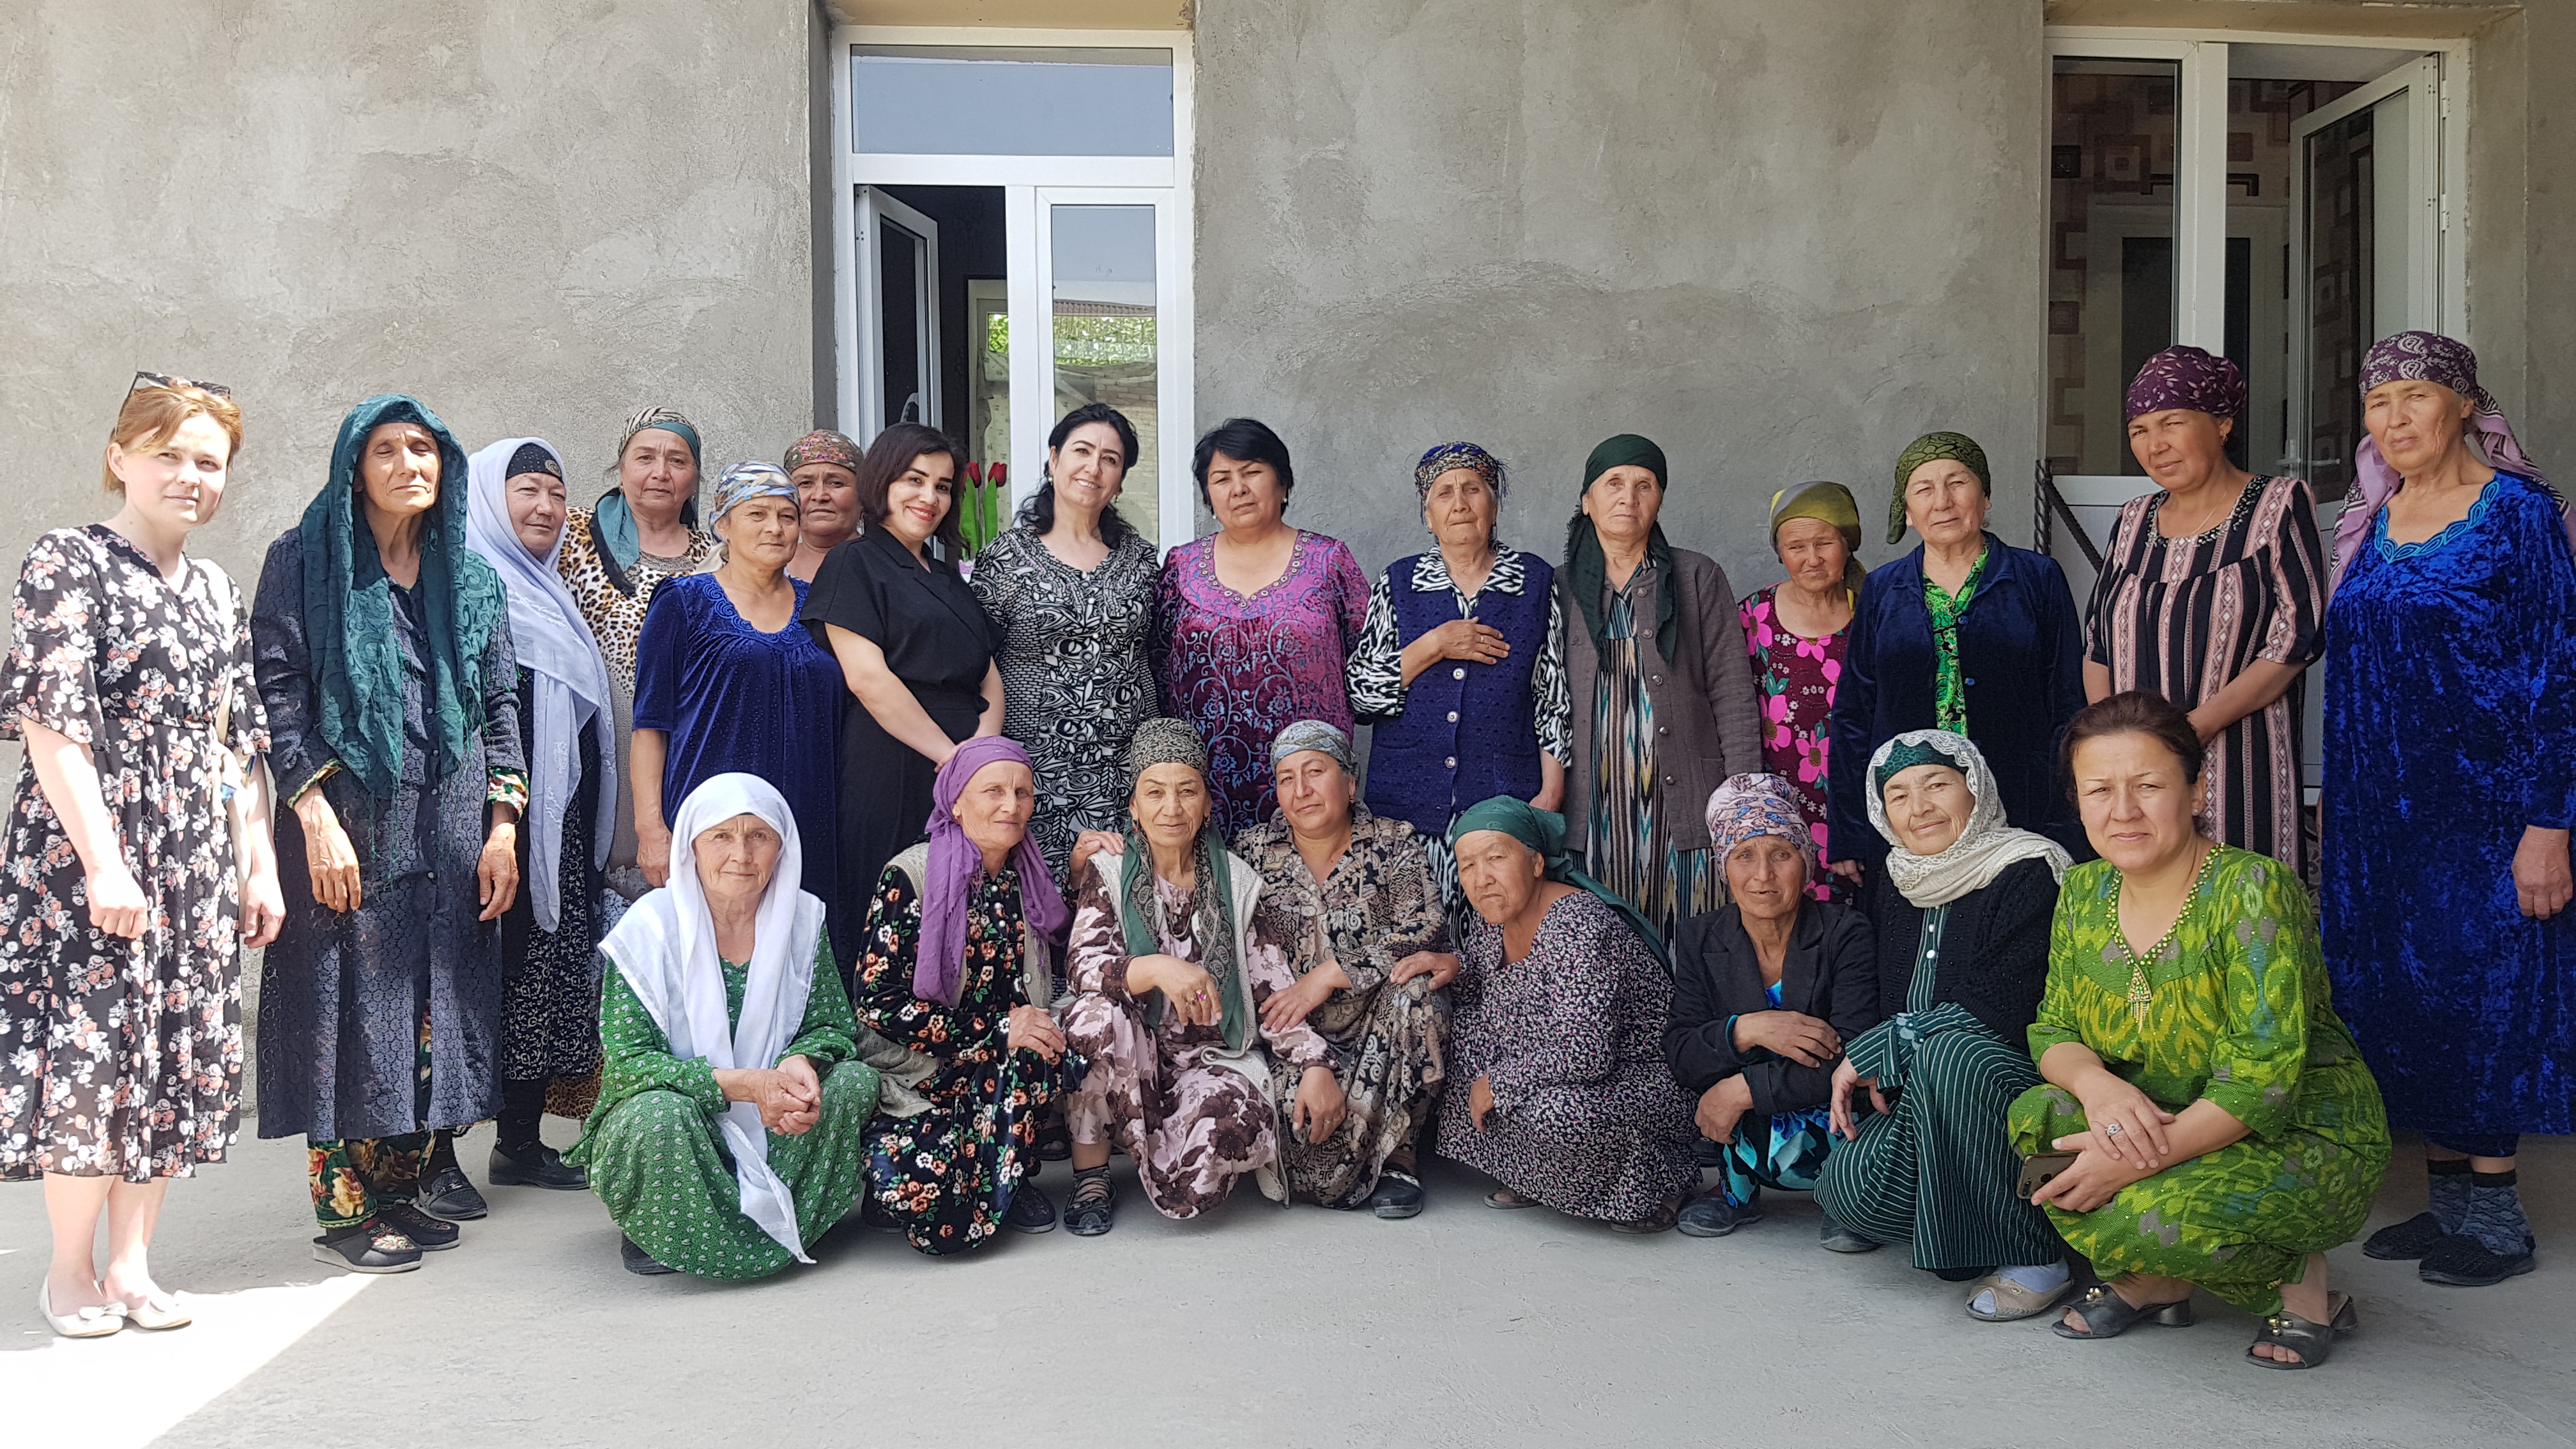 Group of women outside with one row standing up and one row sitting or kneeling down for a group photo